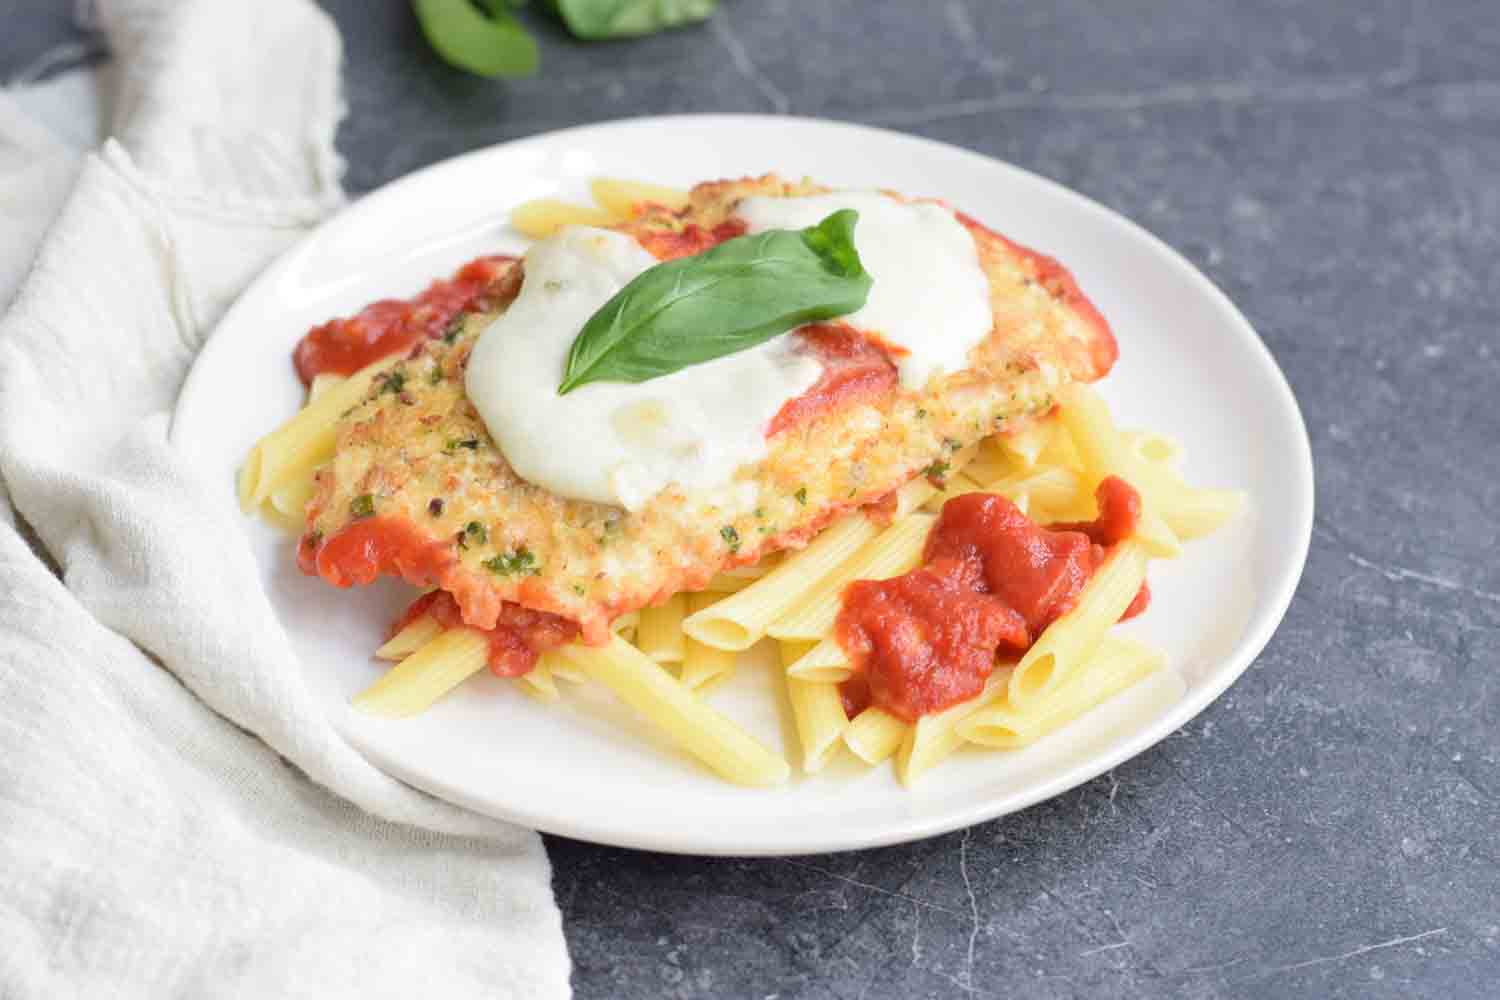 Low FODMAP chicken parmesan with pasta on a plate